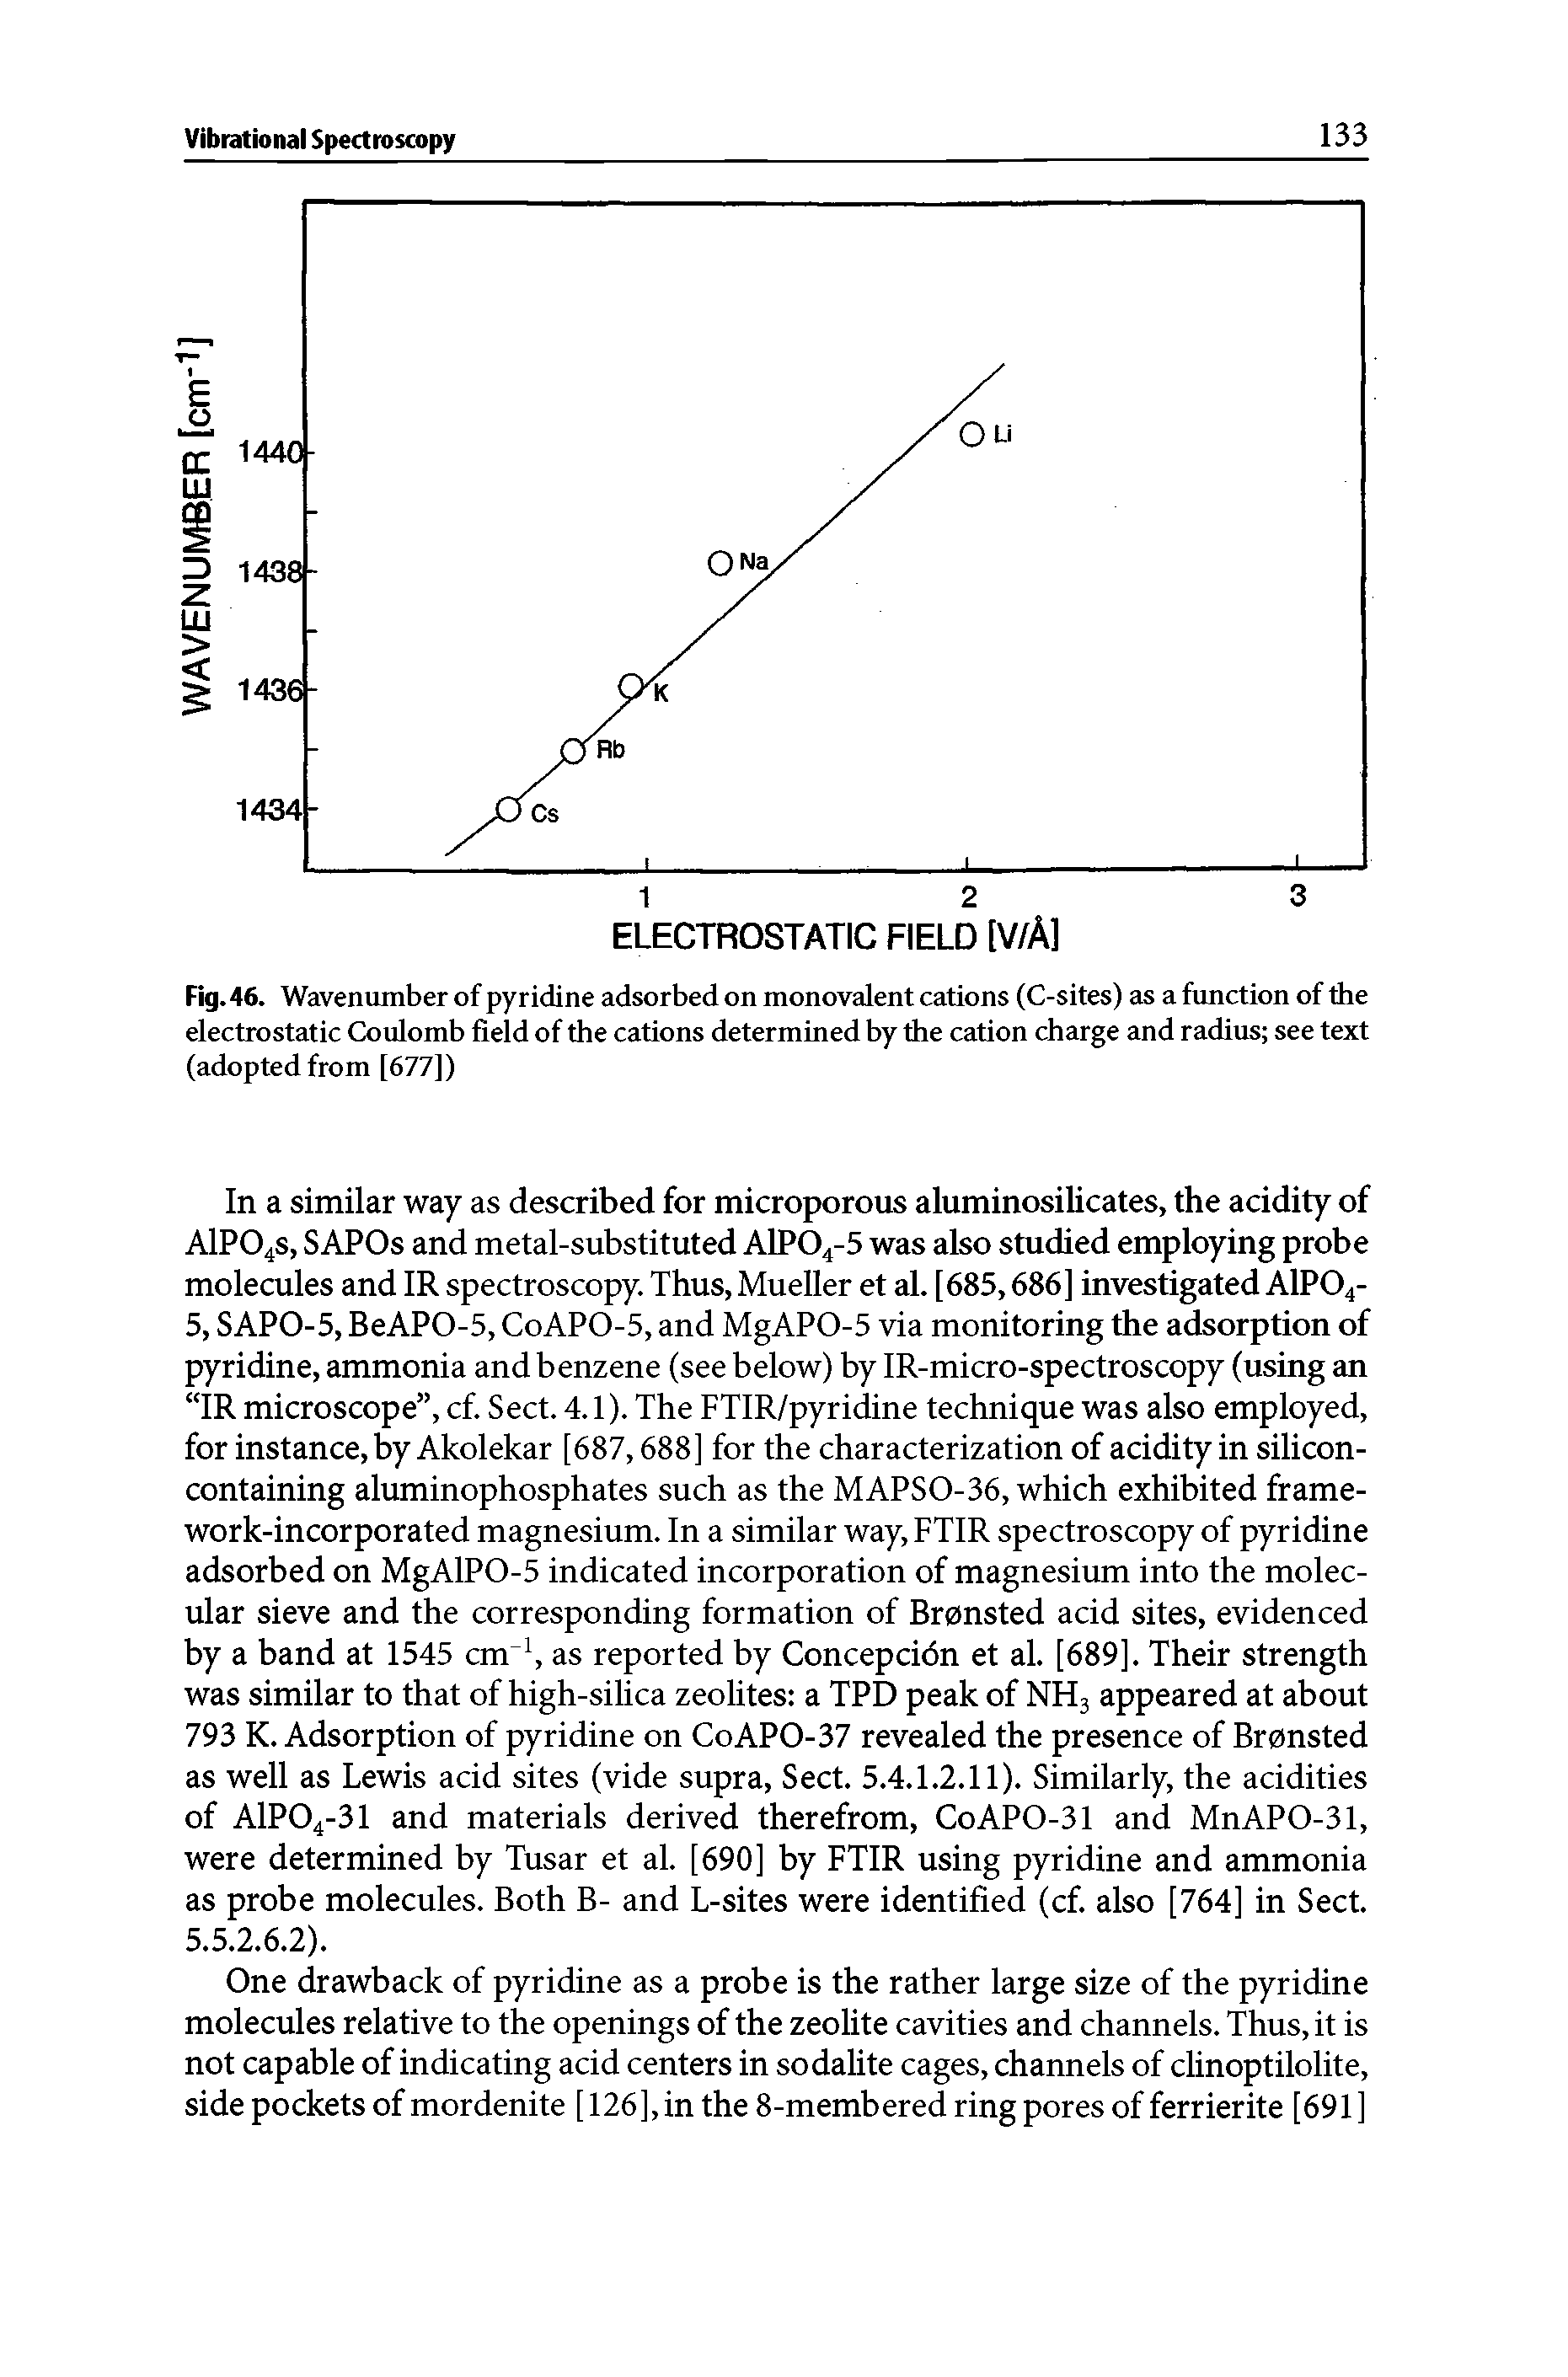 Fig. 46. Wavenumber of pyridine adsorbed on monovalent cations (C-sites) as a function of the electrostatic Coulomb field of the cations determined by the cation charge and radius see text (adopted from [677])...